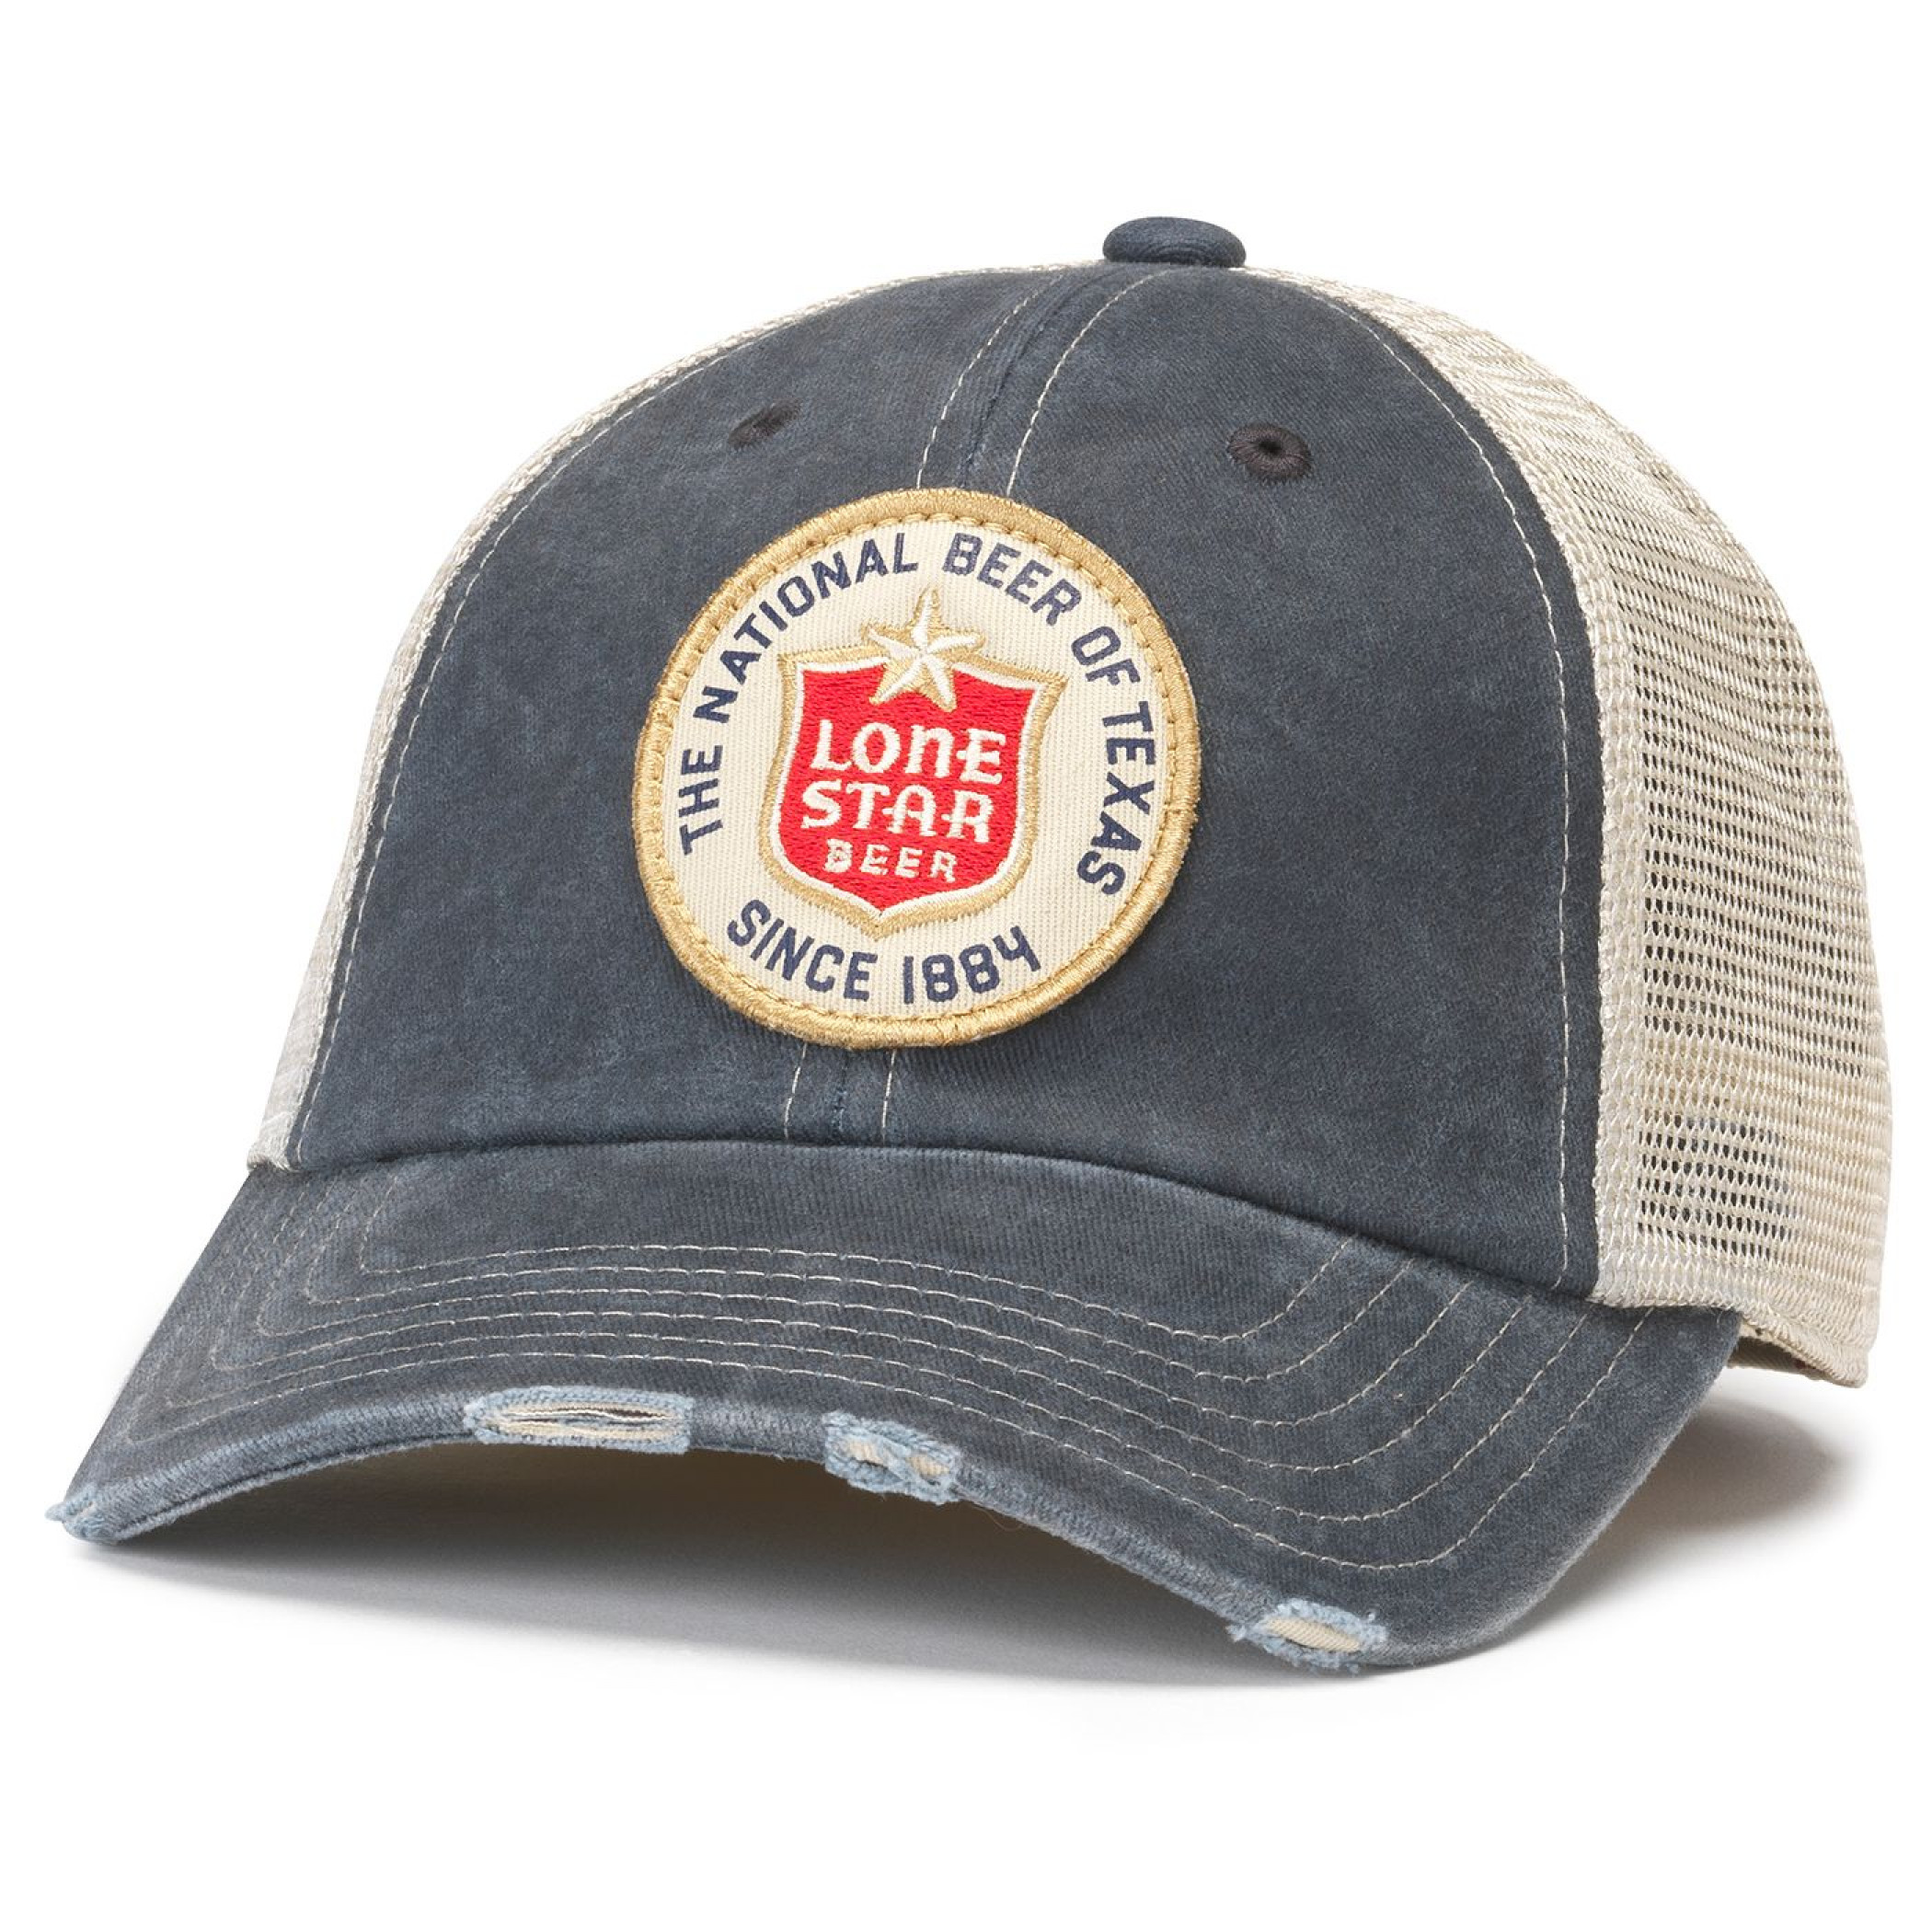 Lone Star Beer Label Patch Distressed Navy Colorway Adjustable Hat